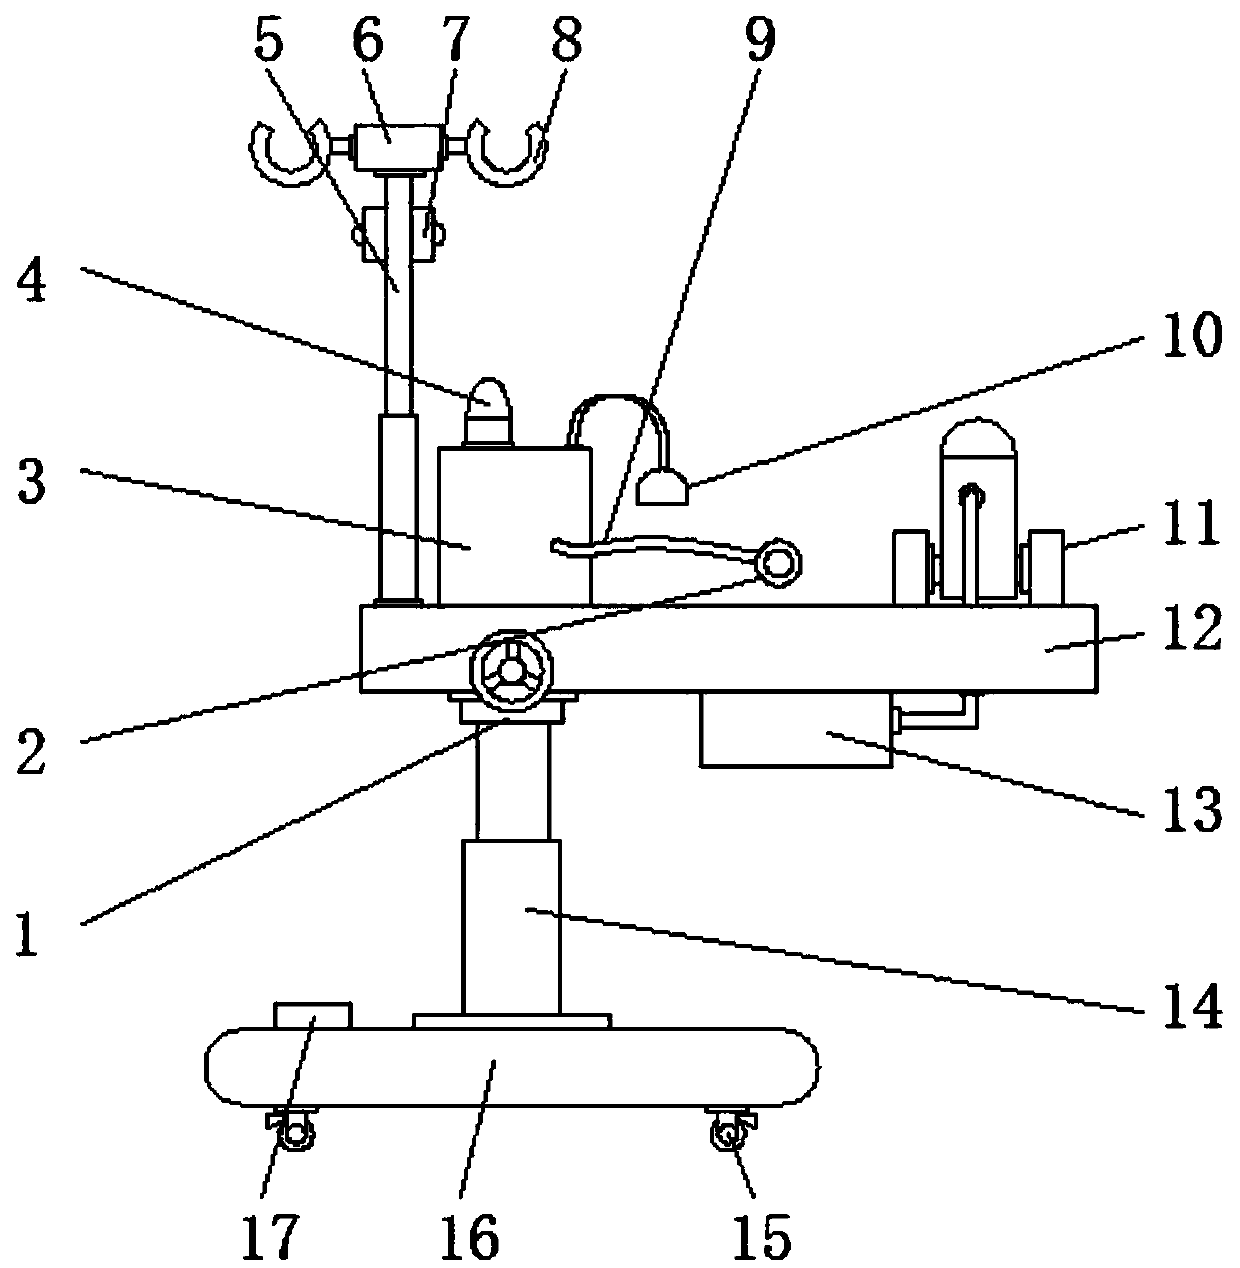 Intravenous infusion and anti-infiltration device for nursing in operating room